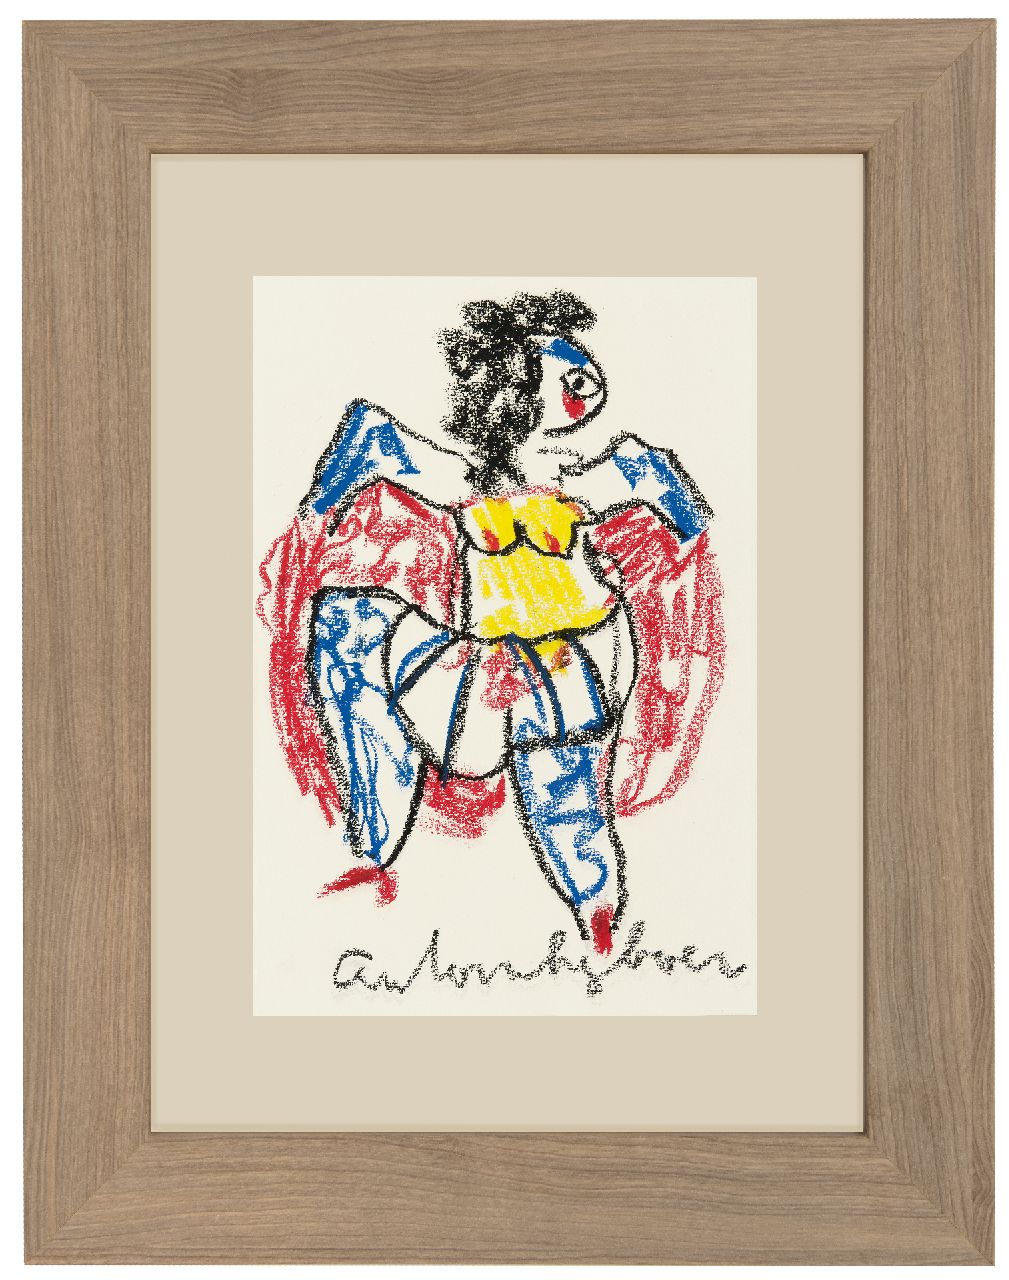 Heyboer A.  | Anton Heyboer | Watercolours and drawings offered for sale | Dancer, chalk on paper 29.0 x 20.0 cm, signed l.c.